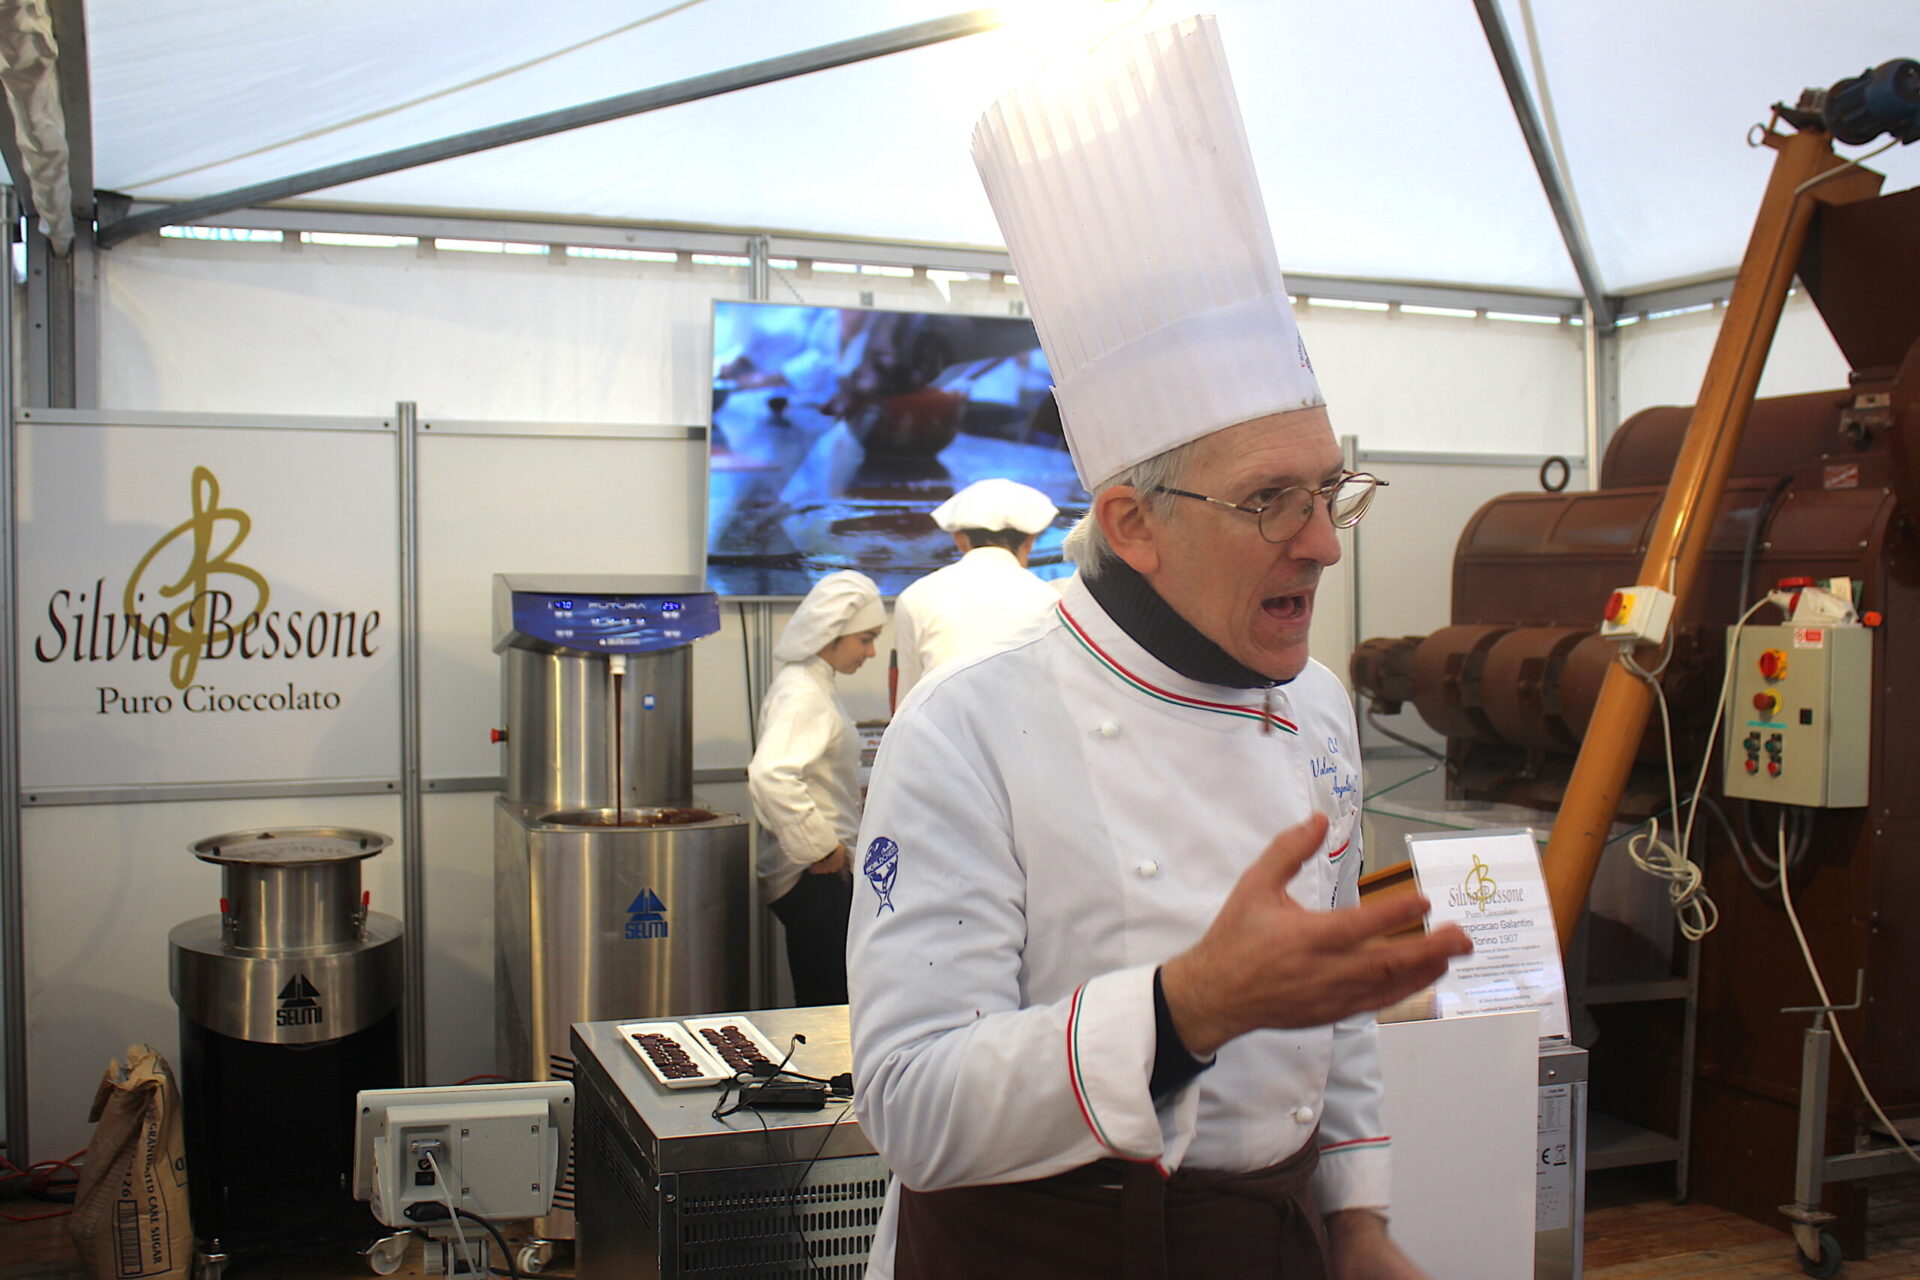 Male chef demonstrating the chocolate making process in Piedmont